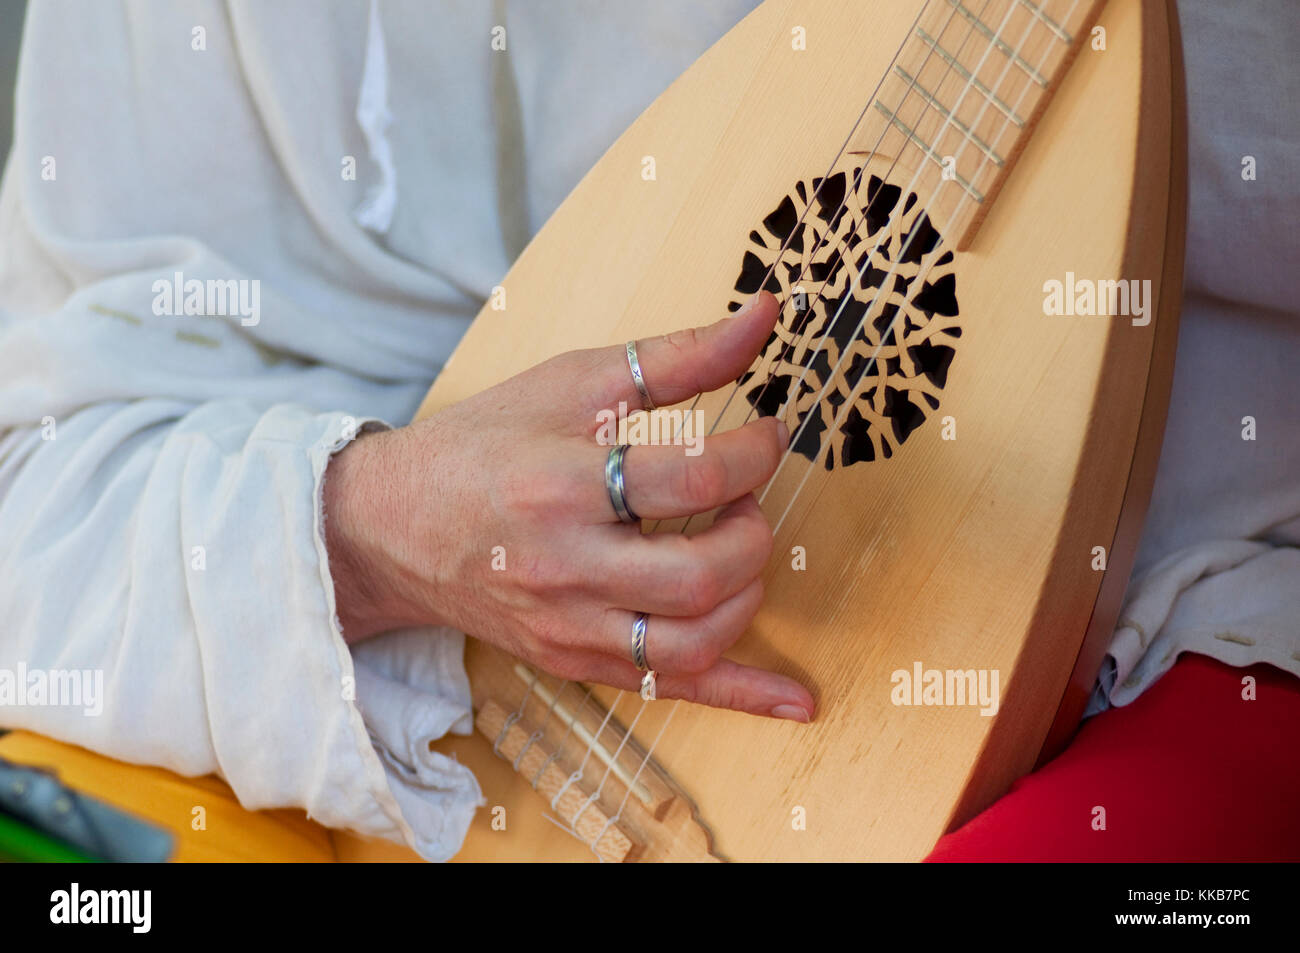 Italy, Lombardy, Crema, Mediaeval Festival, Men Dressed in Medieval Costume Playing Musical Instrument Lute Stock Photo